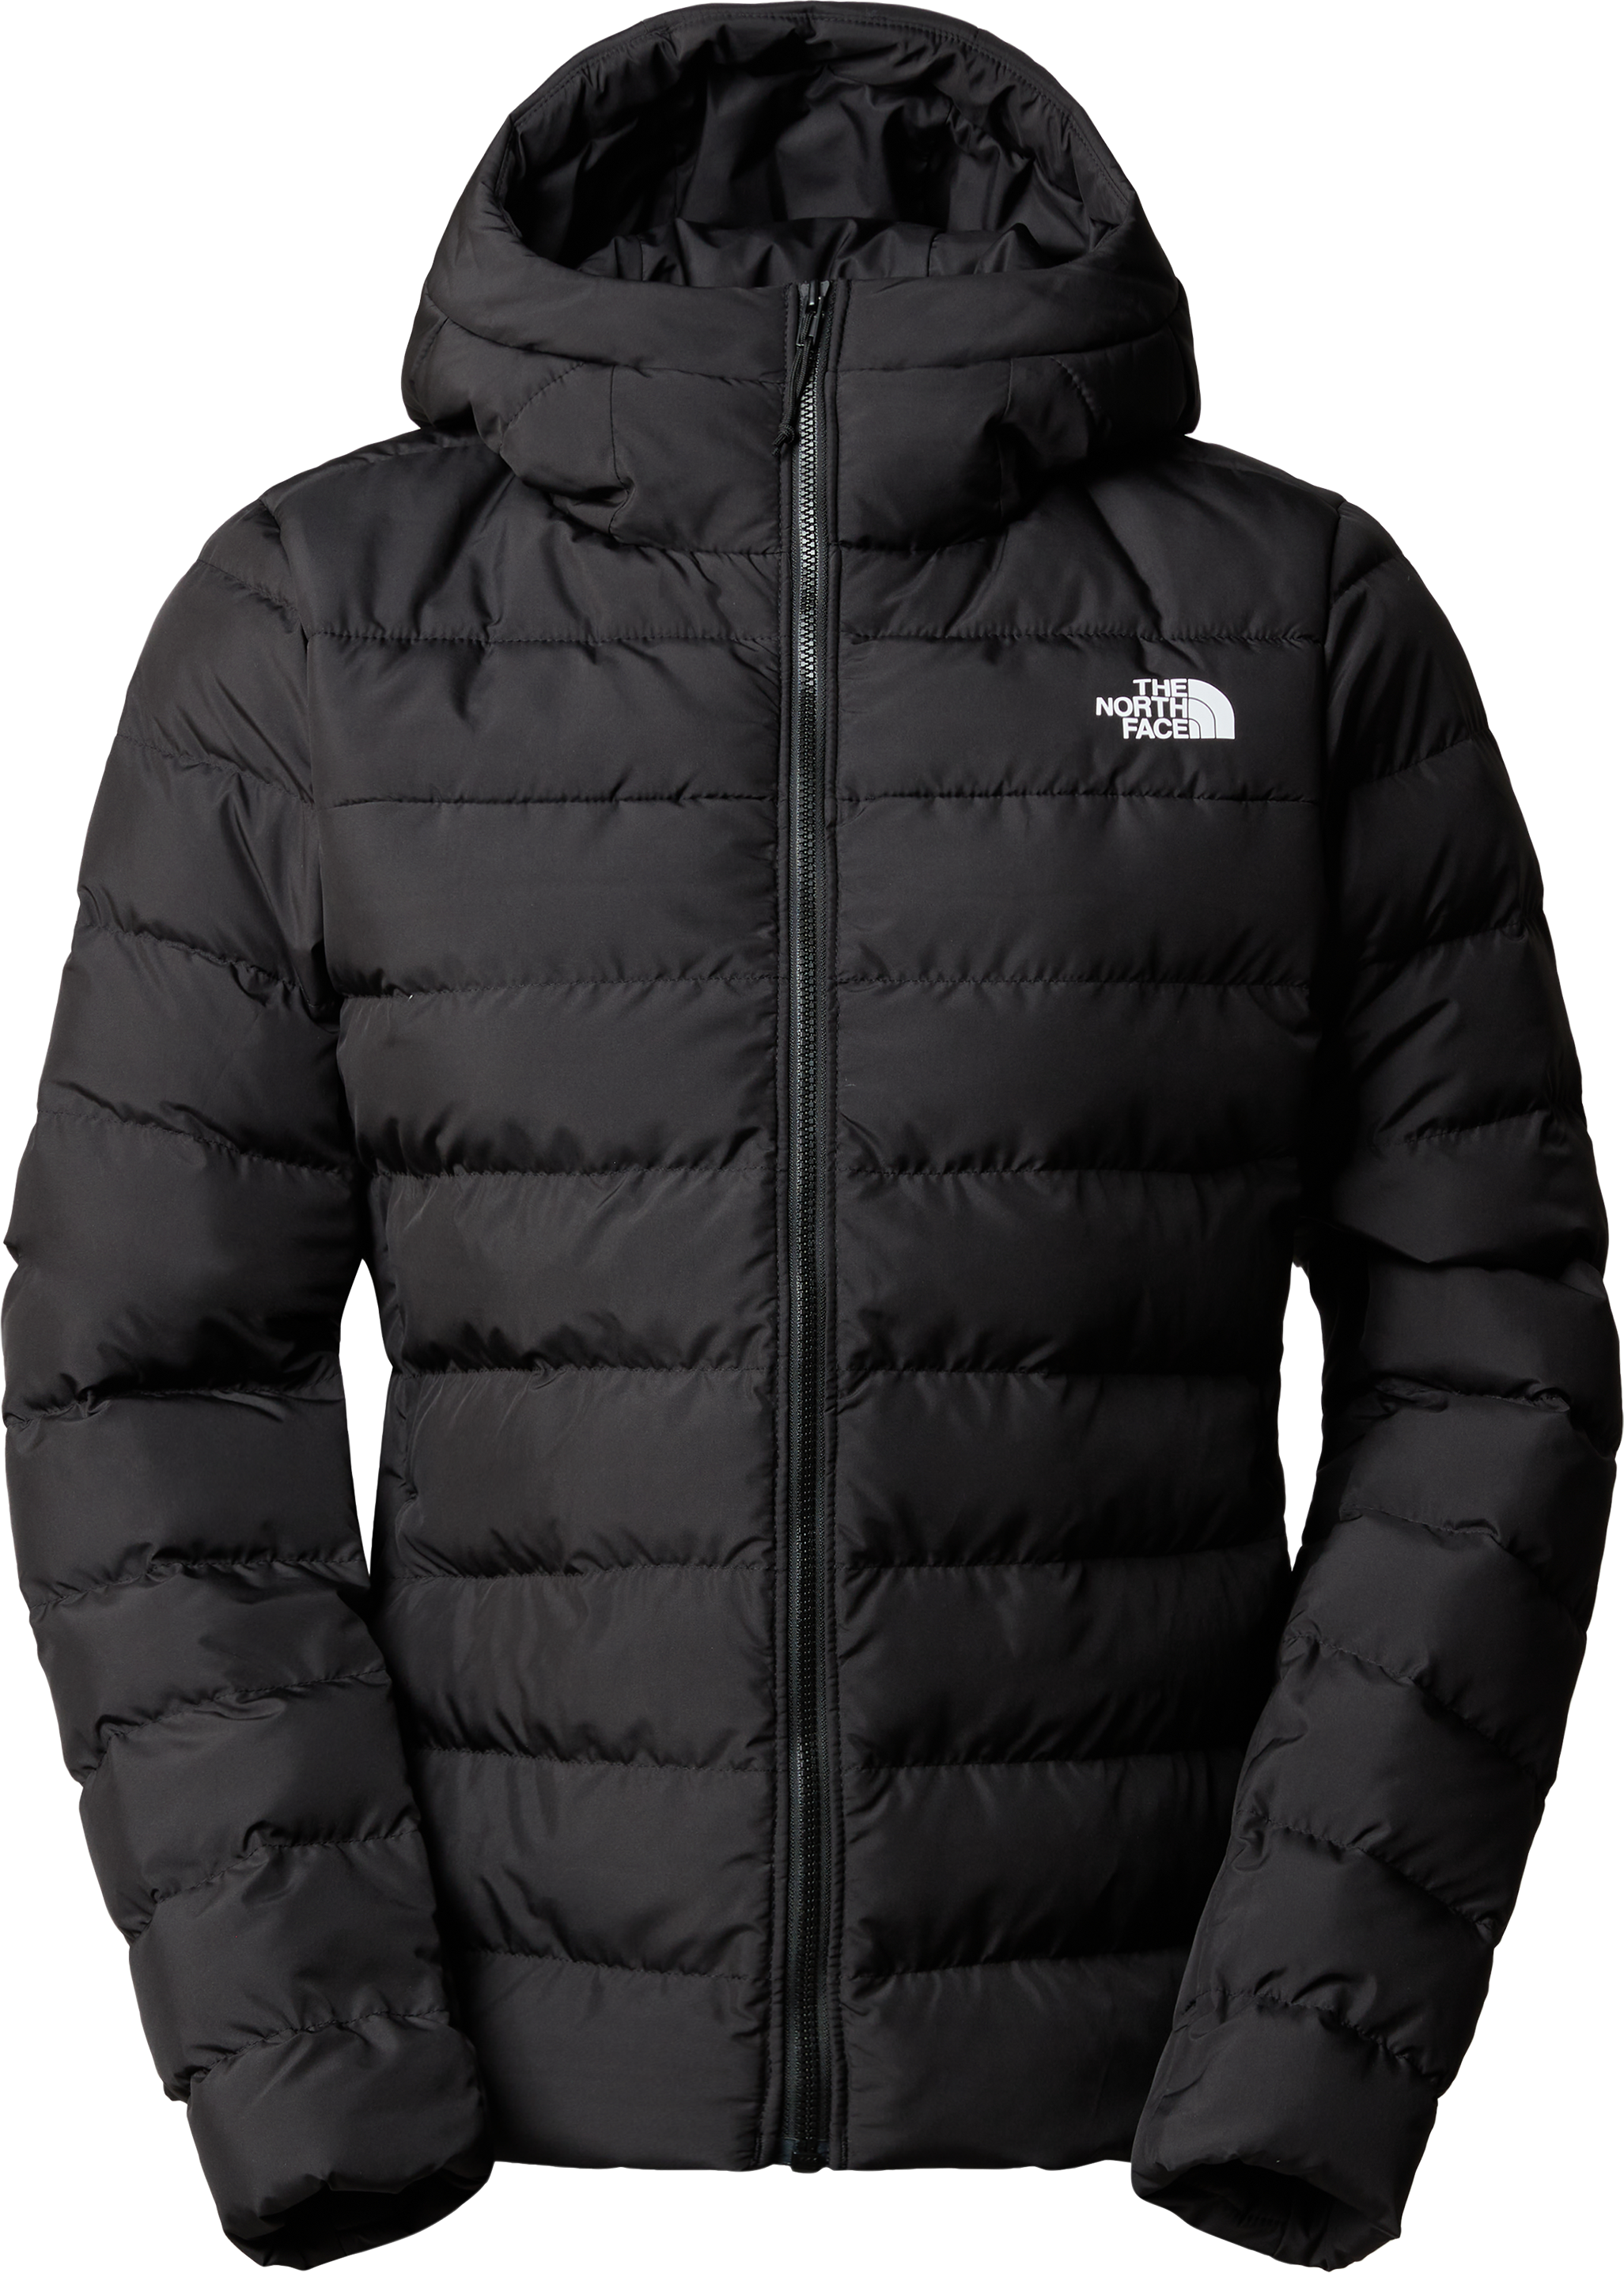 The North Face Women’s Aconcagua 3 Hoodie TNF BLACK